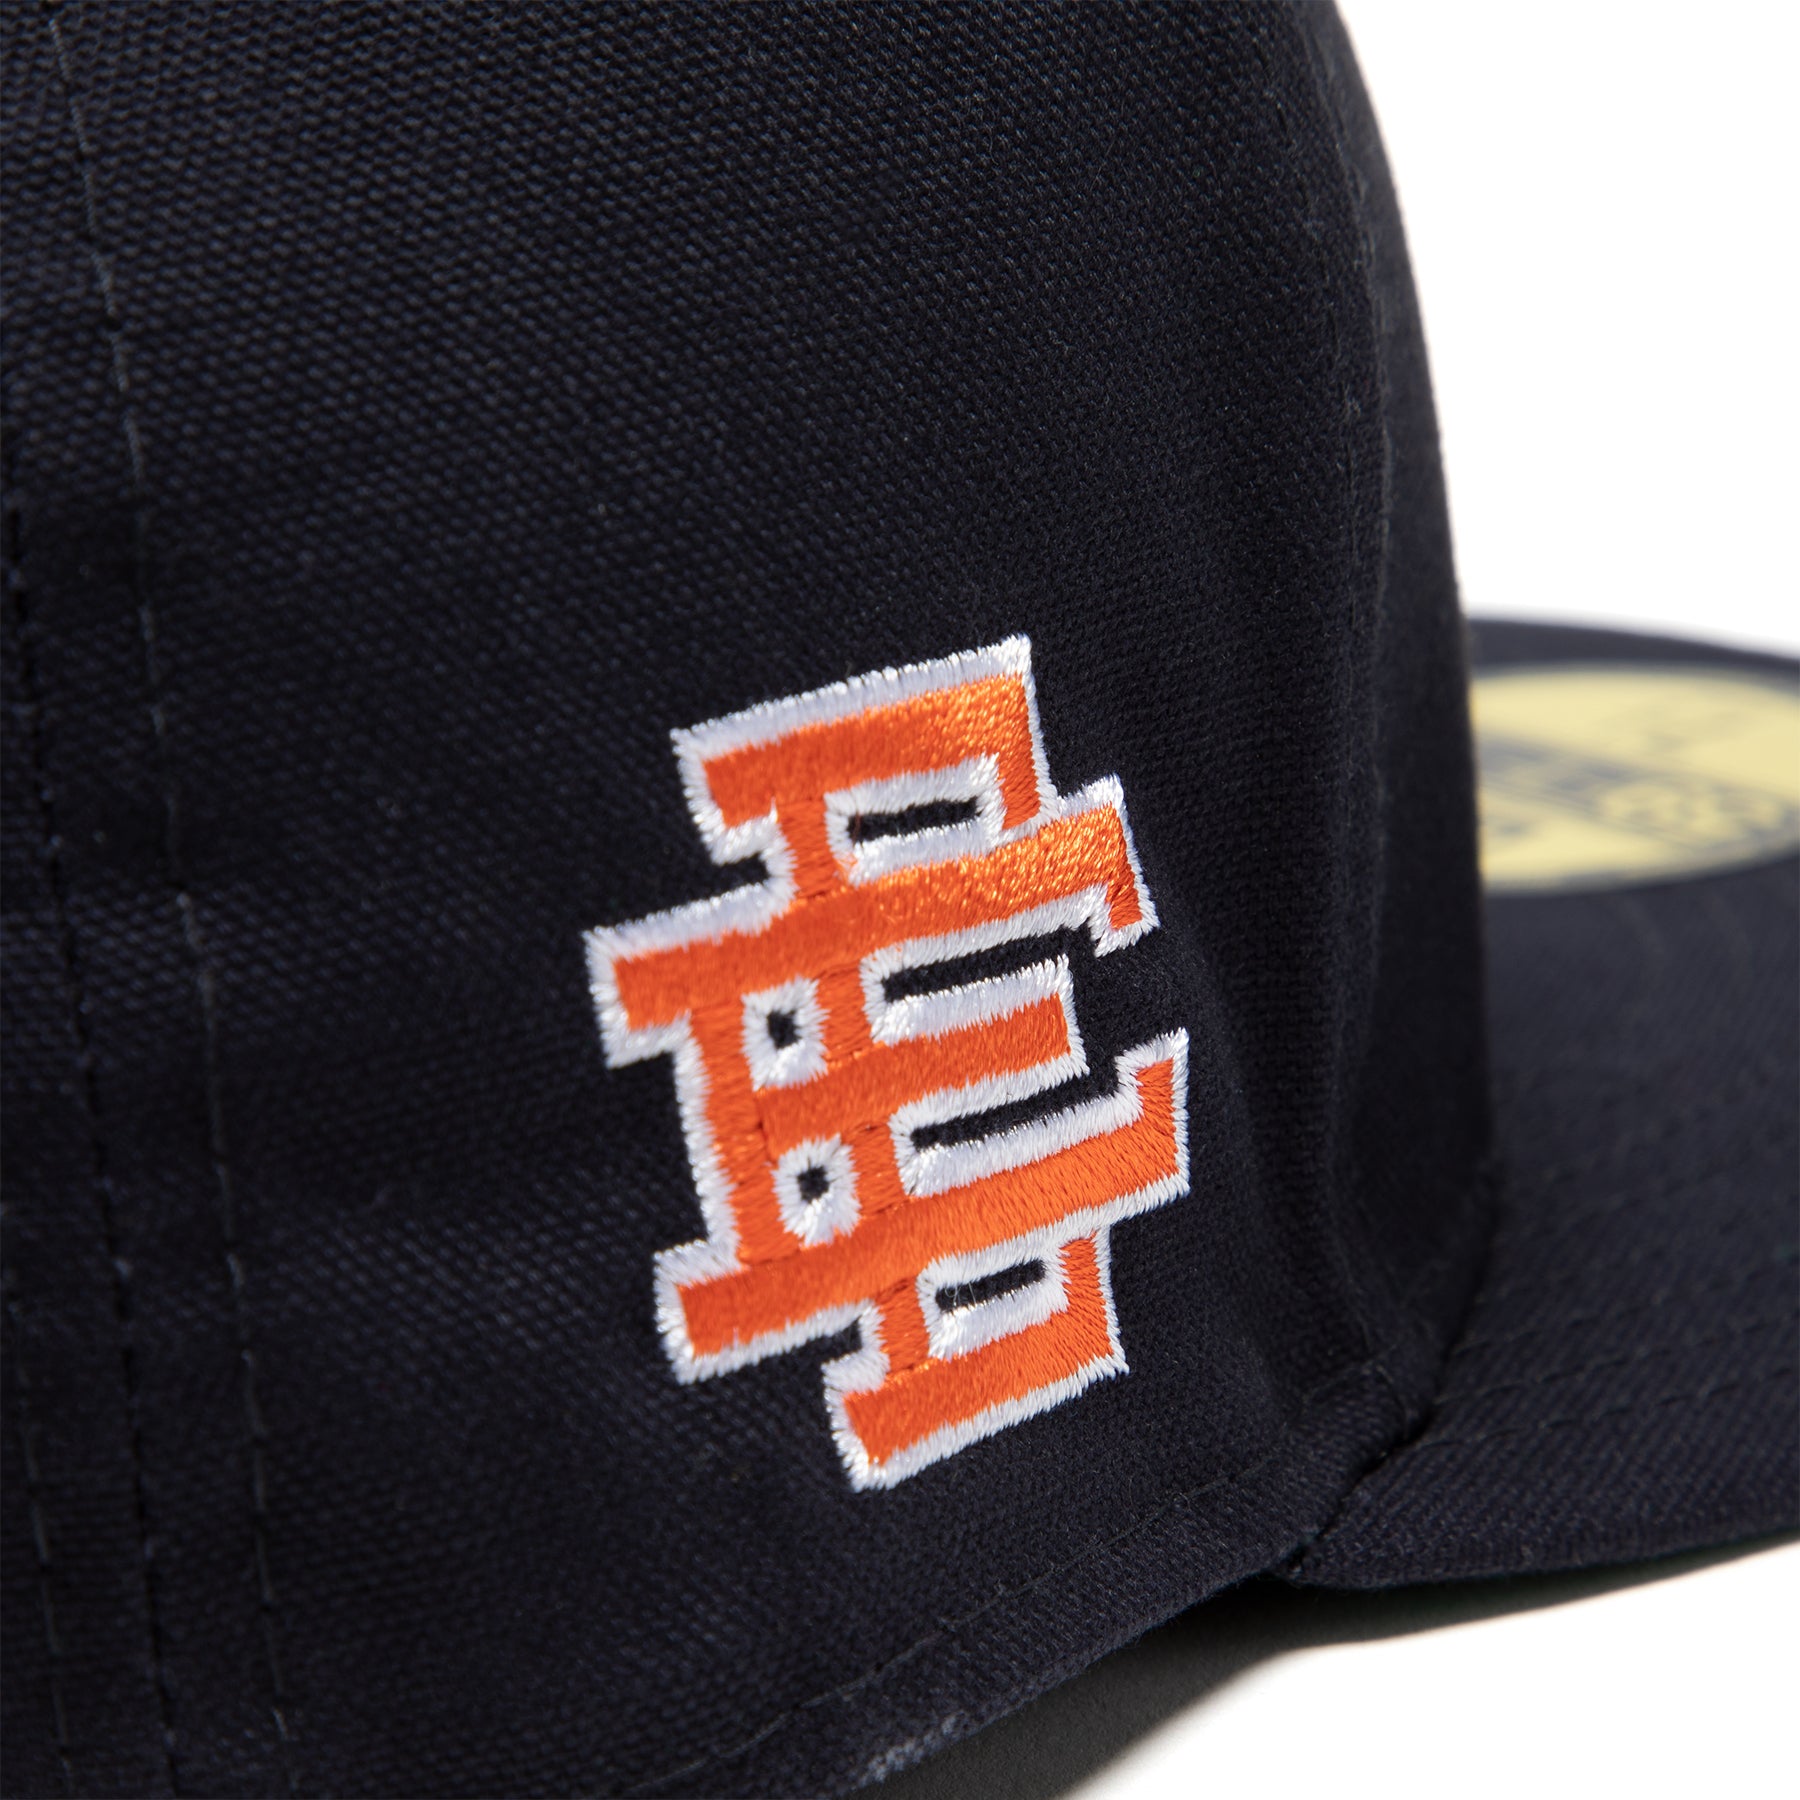 New Era x Eric Emanuel Houston Astros Fitted Hat (Navy) – Concepts